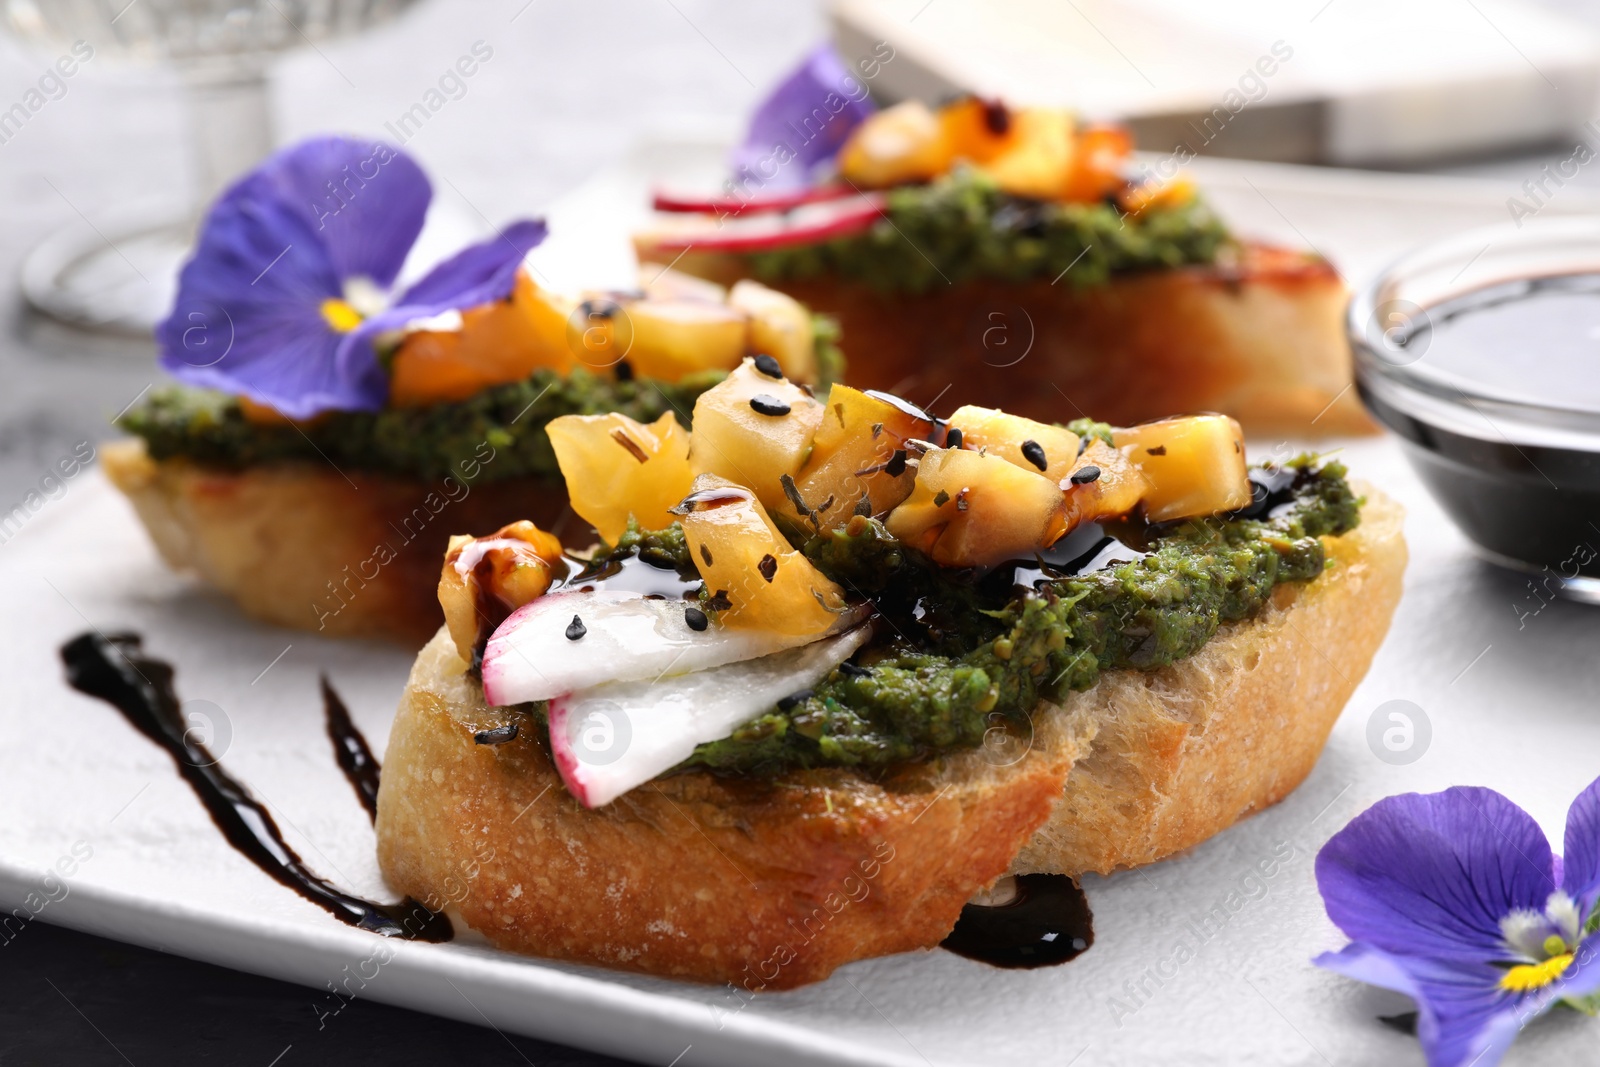 Photo of Delicious bruschettas with pesto sauce, tomatoes, balsamic vinegar and violet flowers on white plate, closeup